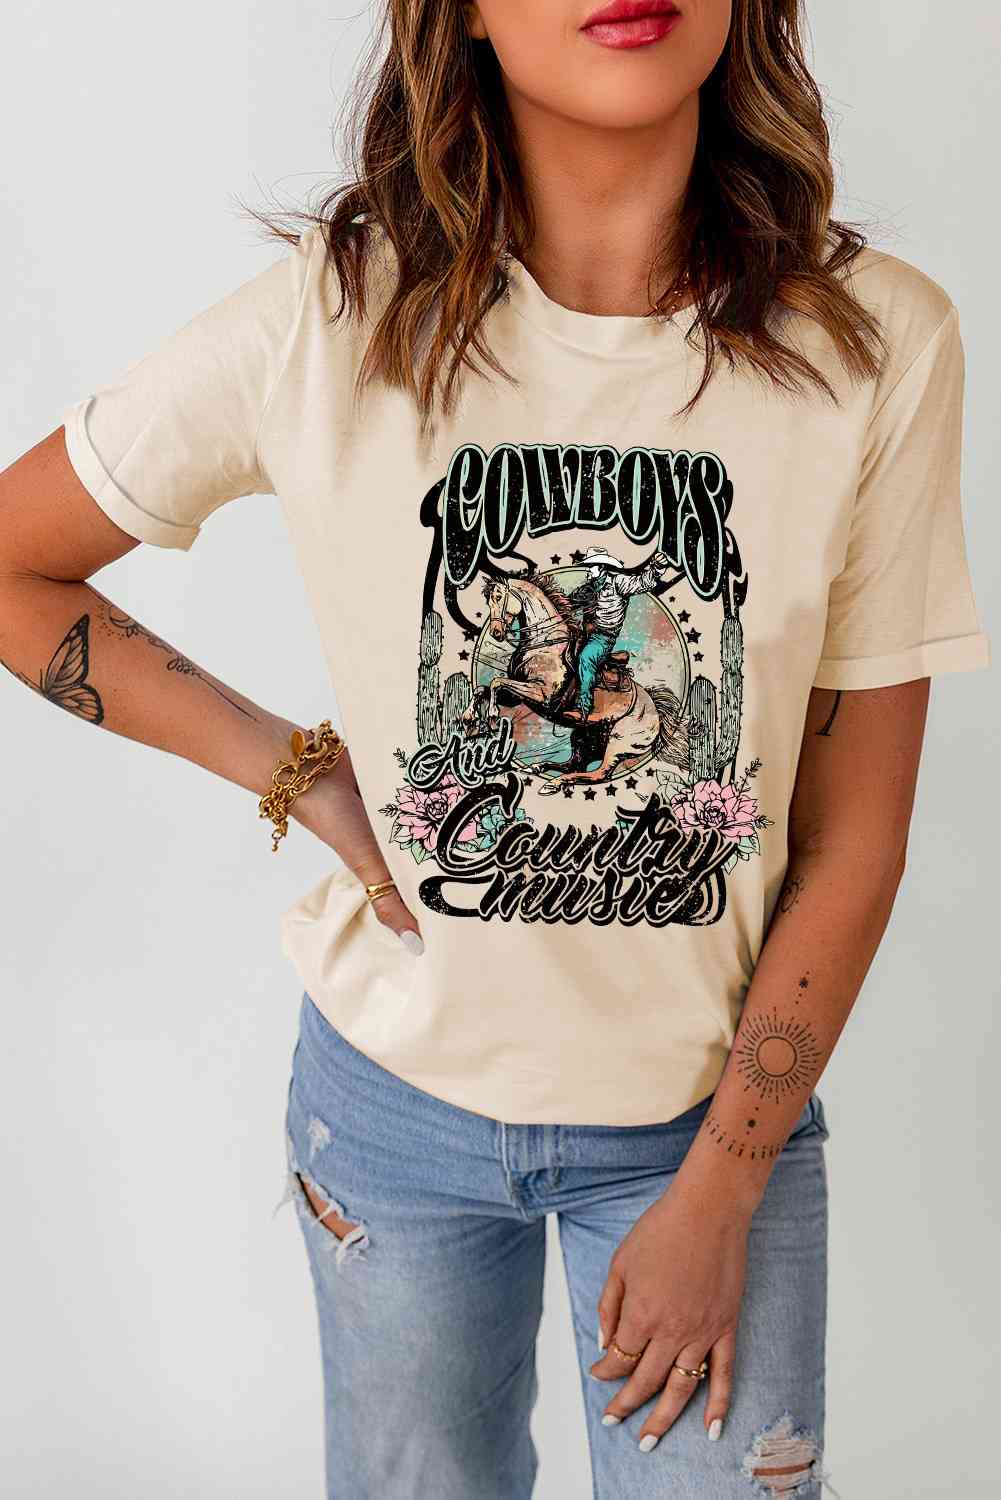 Cowboys and Country Music Graphic Tee